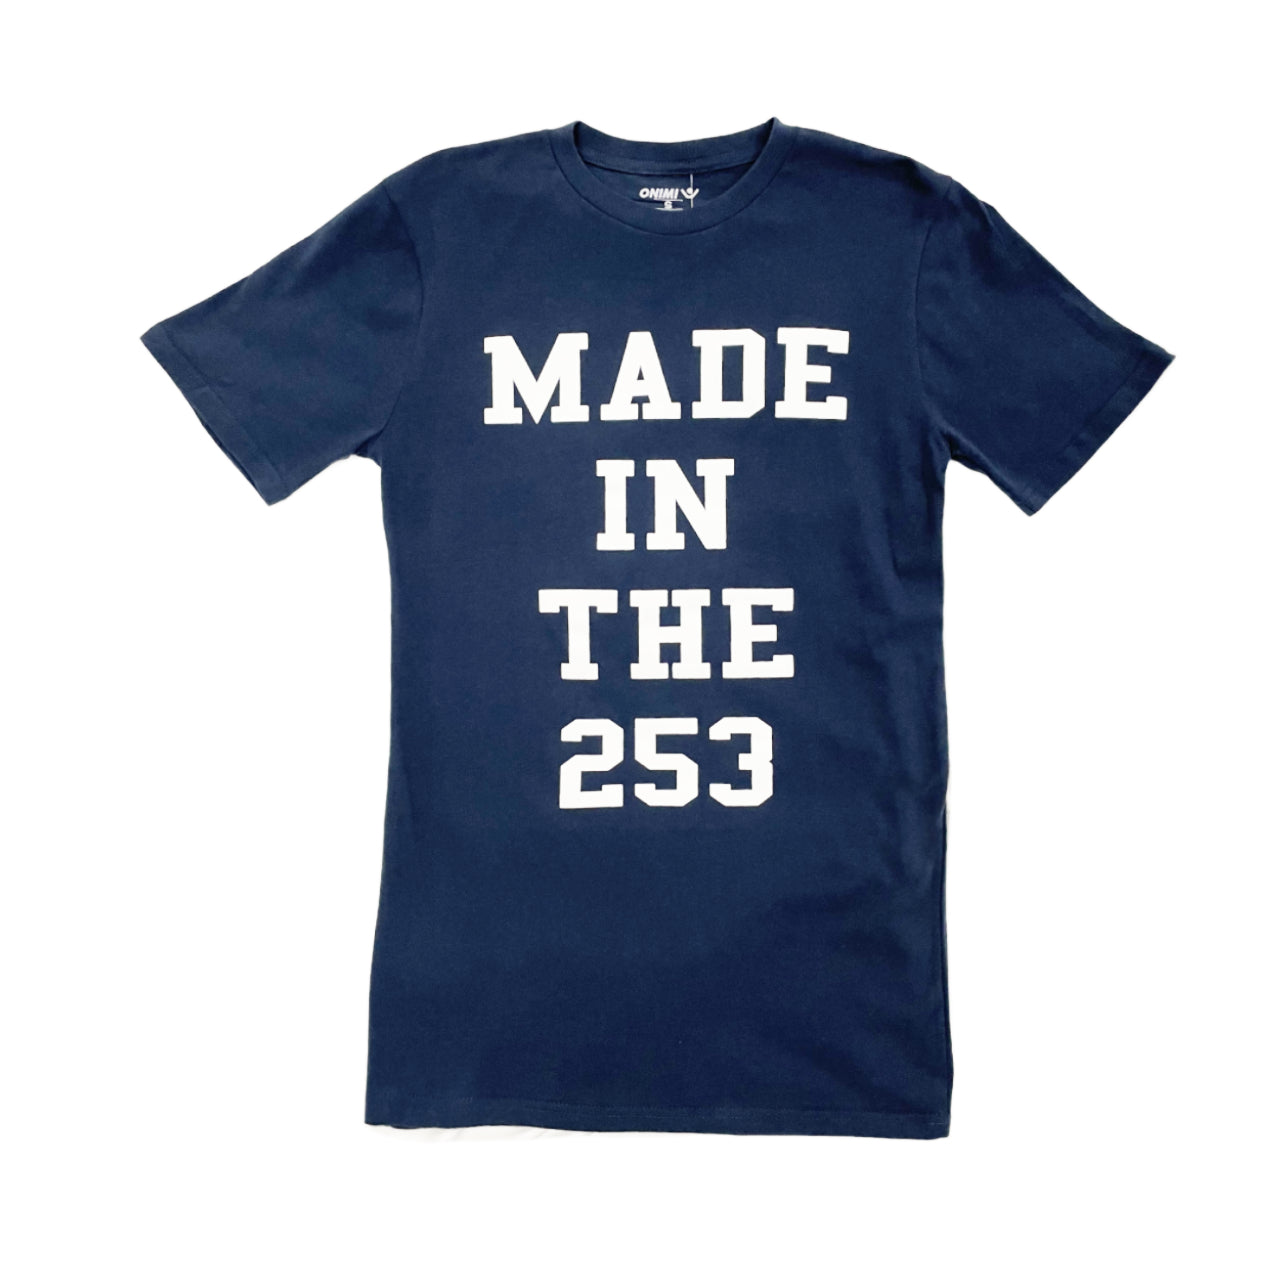 Made in the 253 (Navy)